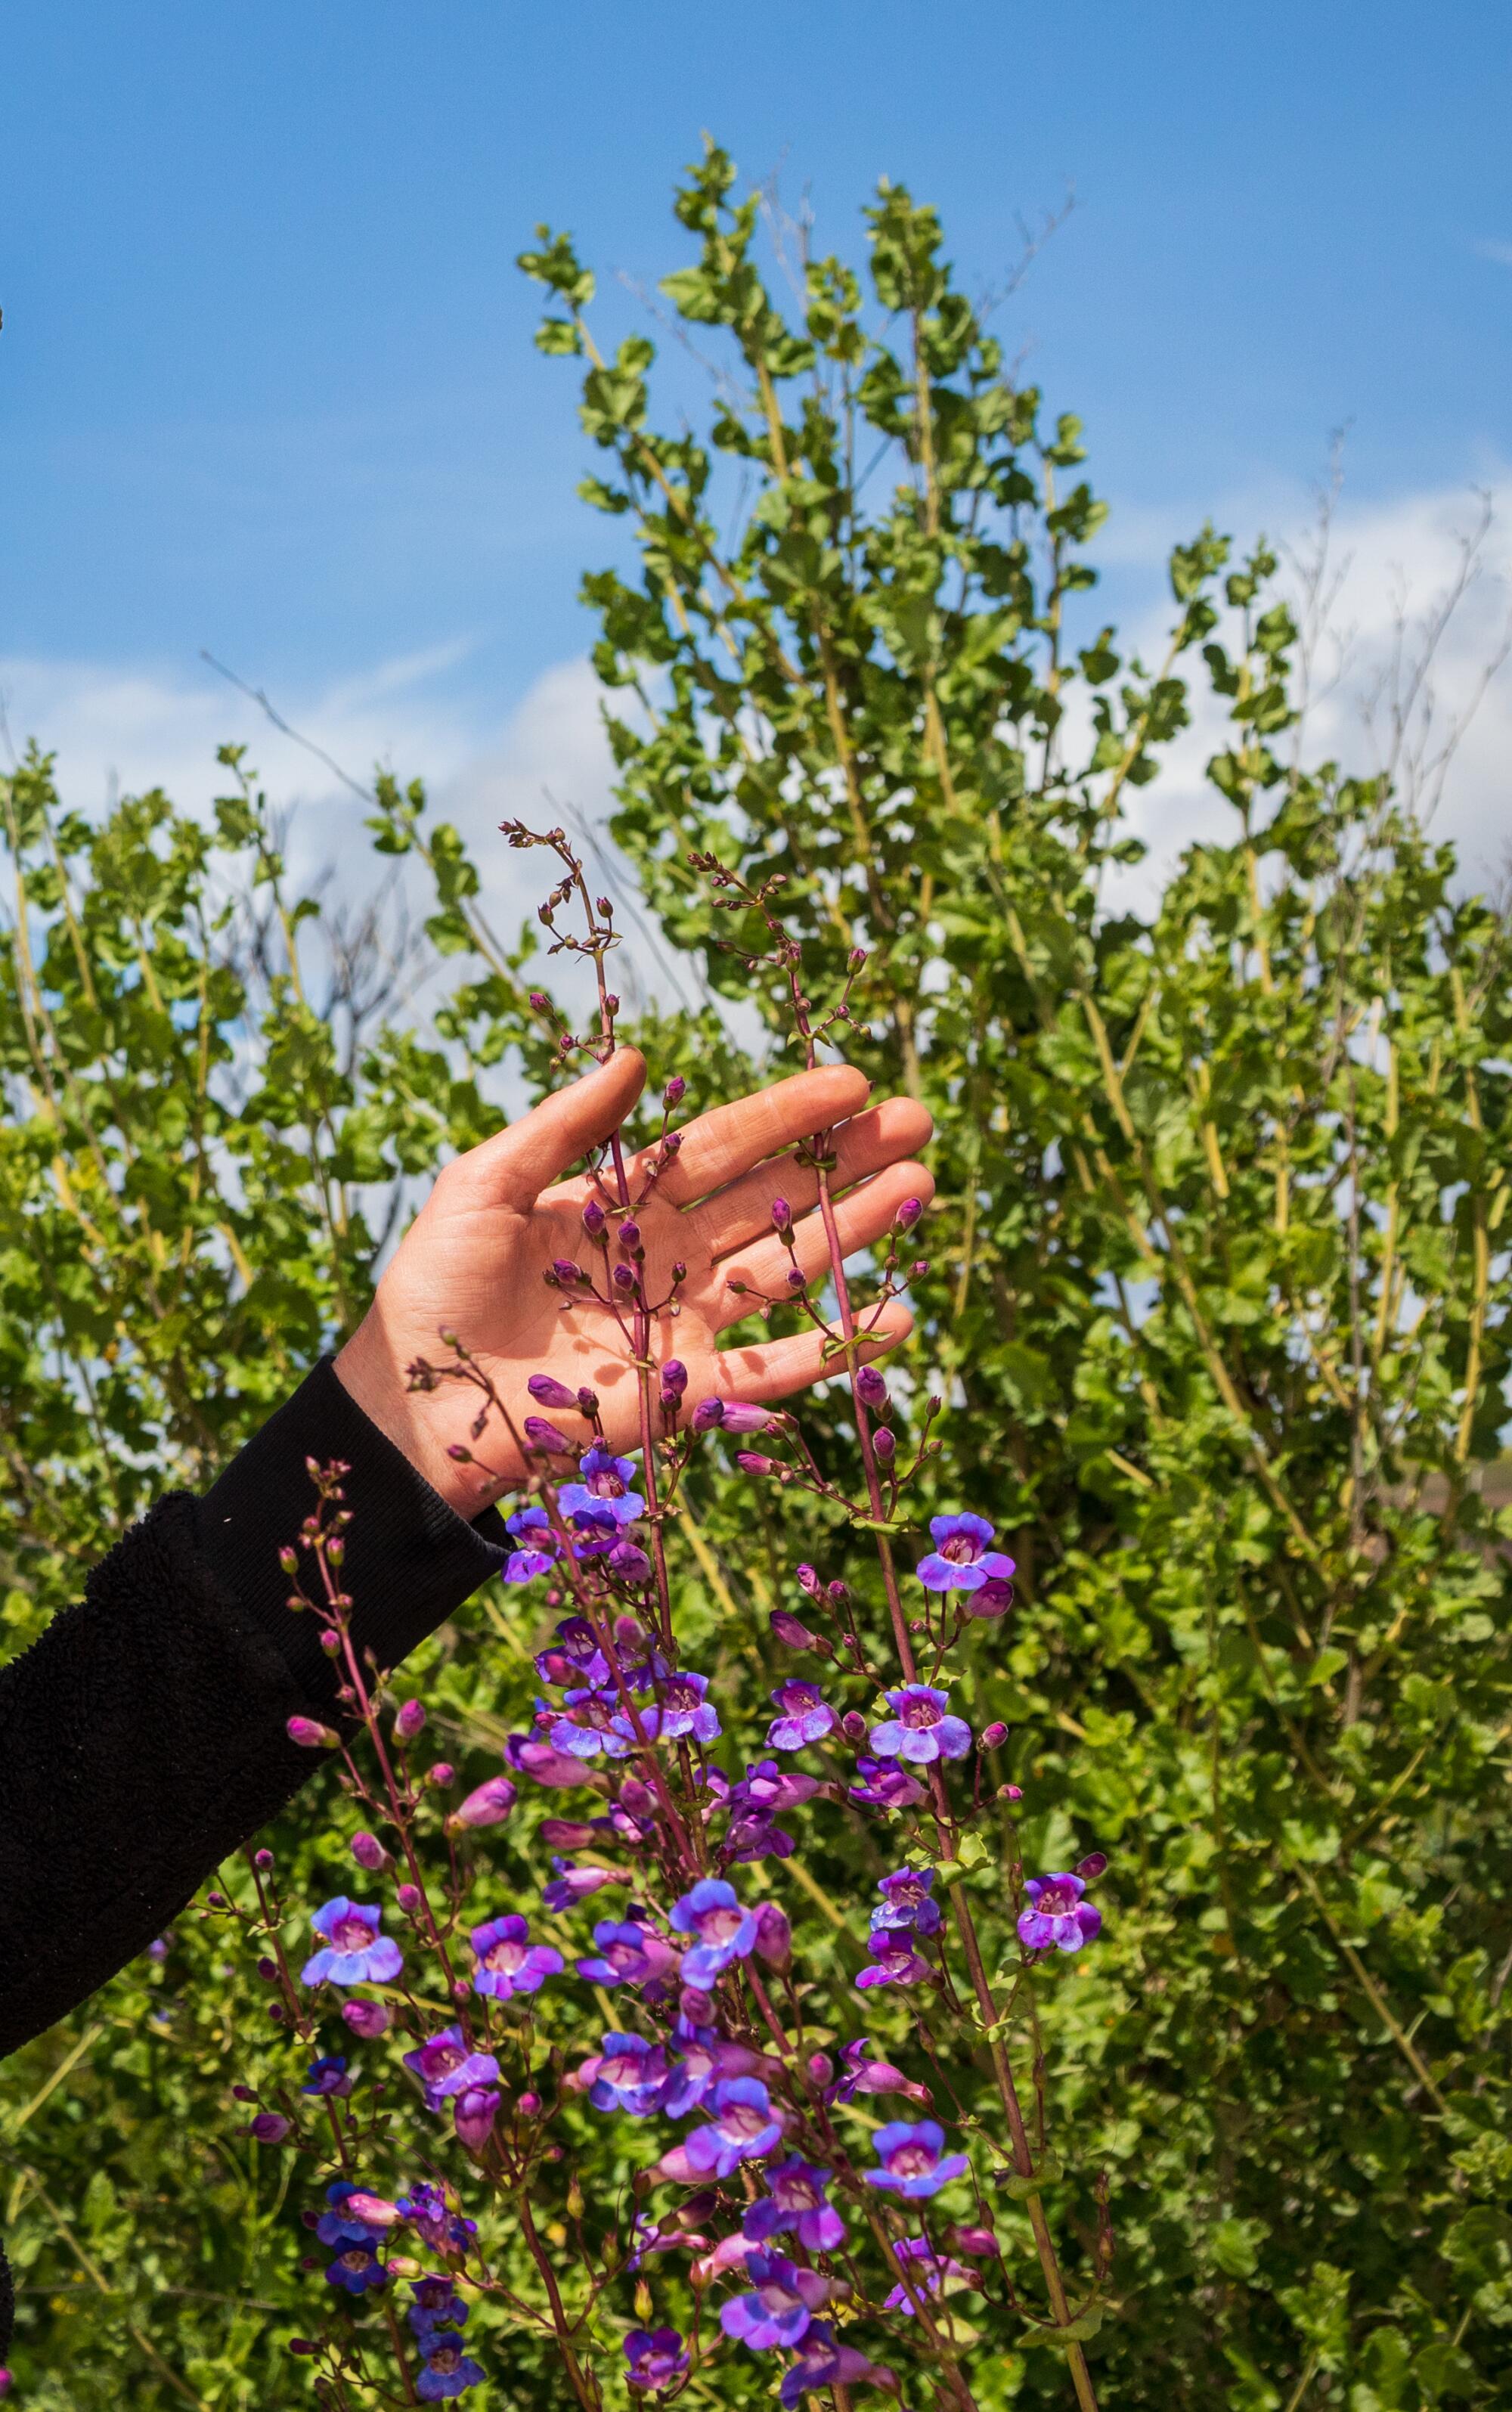 A hand reaching out to touch a native plant with purple flowers.